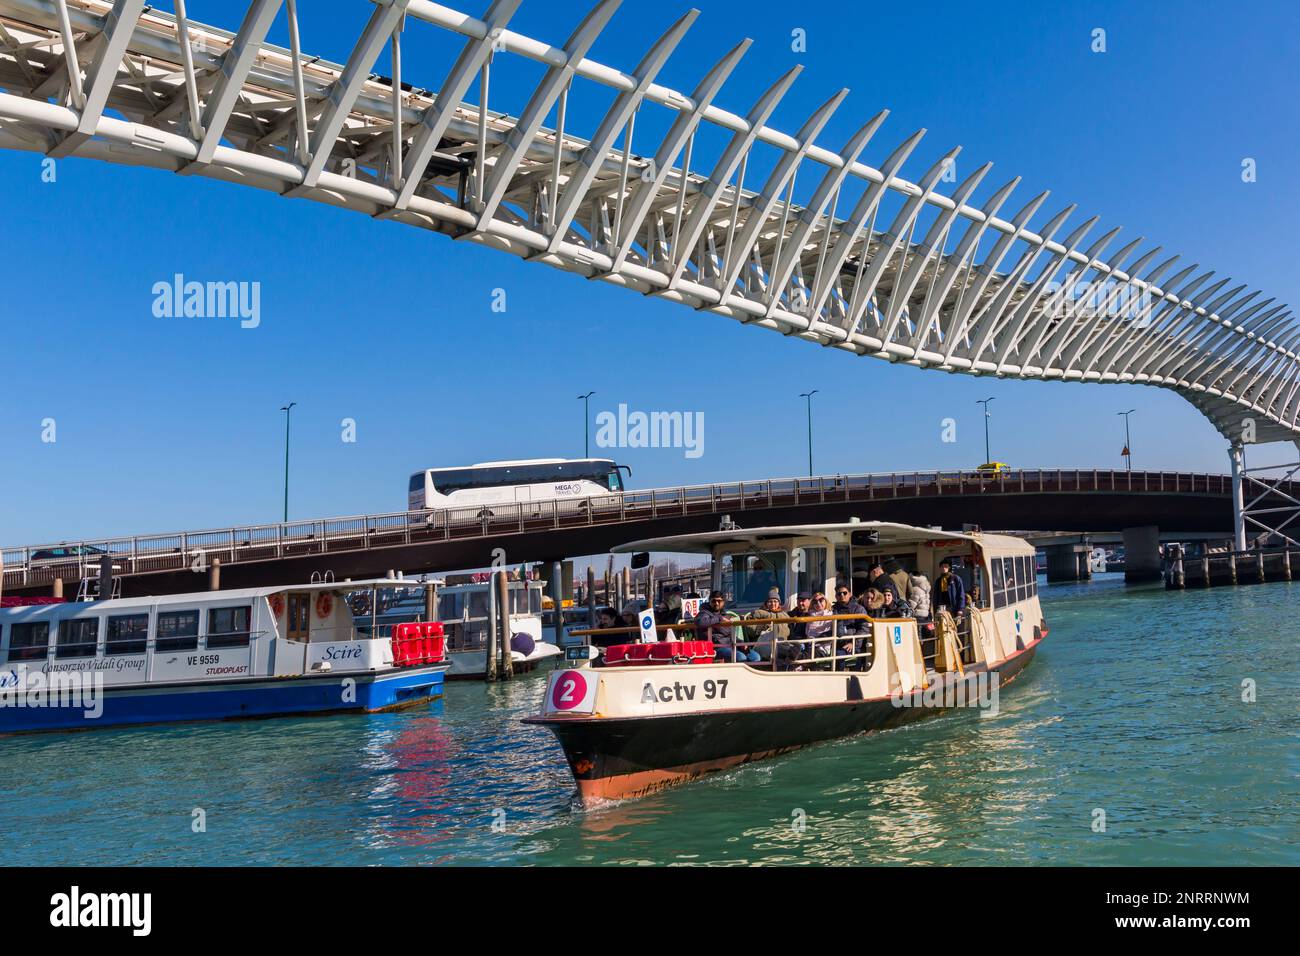 modern monorail elevated railway track of the Venice People Mover public transit system between Piazzale Roma and Venice cruise port at Venice, Italy Stock Photo